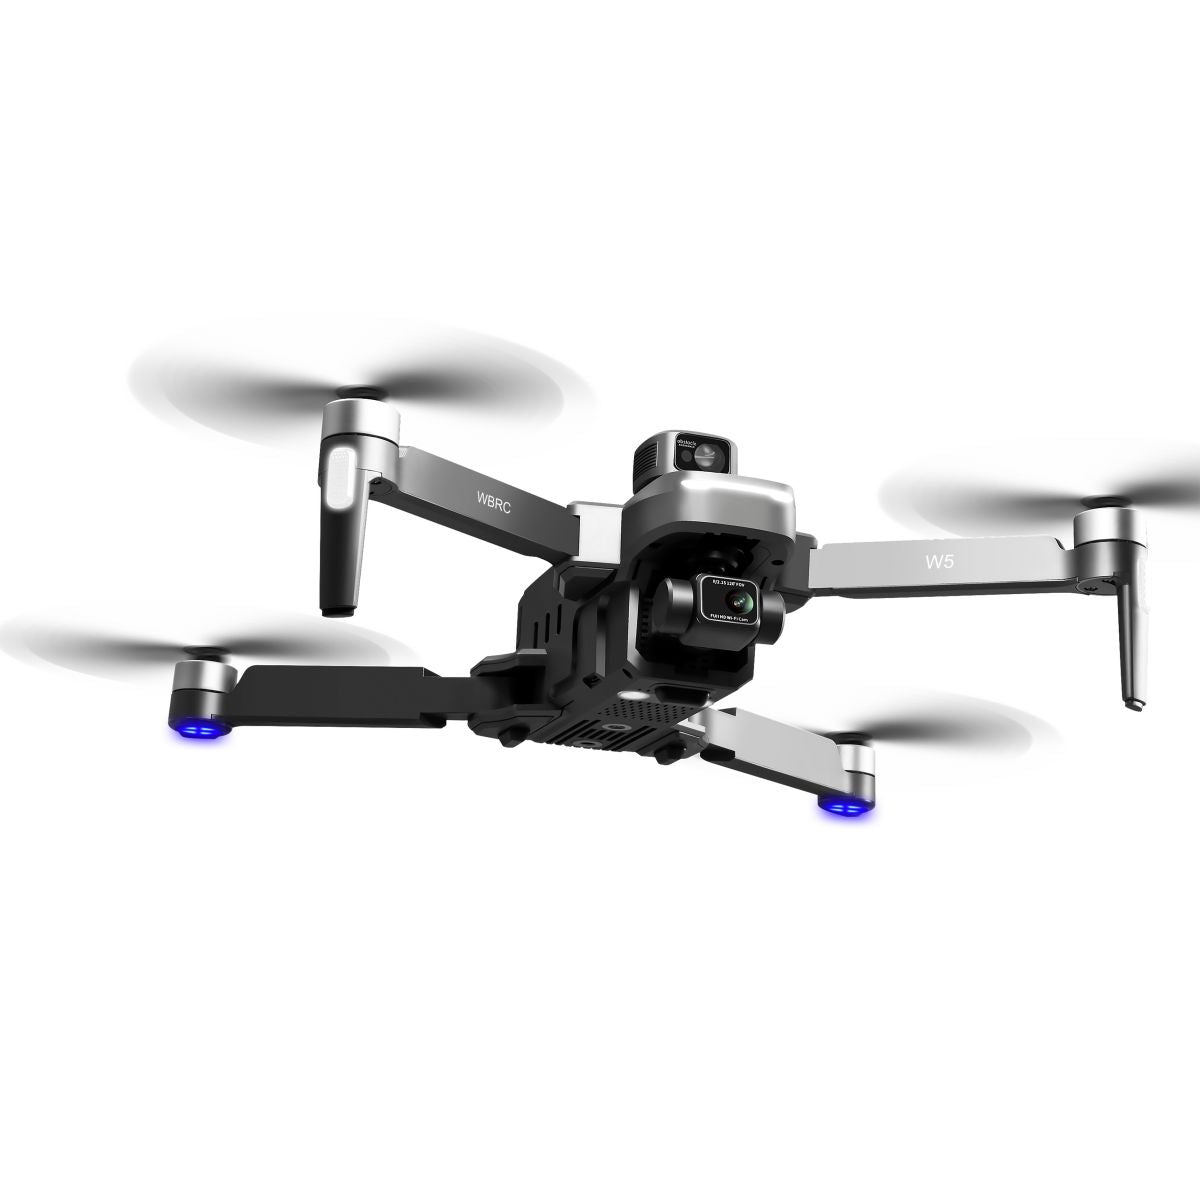 W5 Aerial Photography Drone - Hugmie